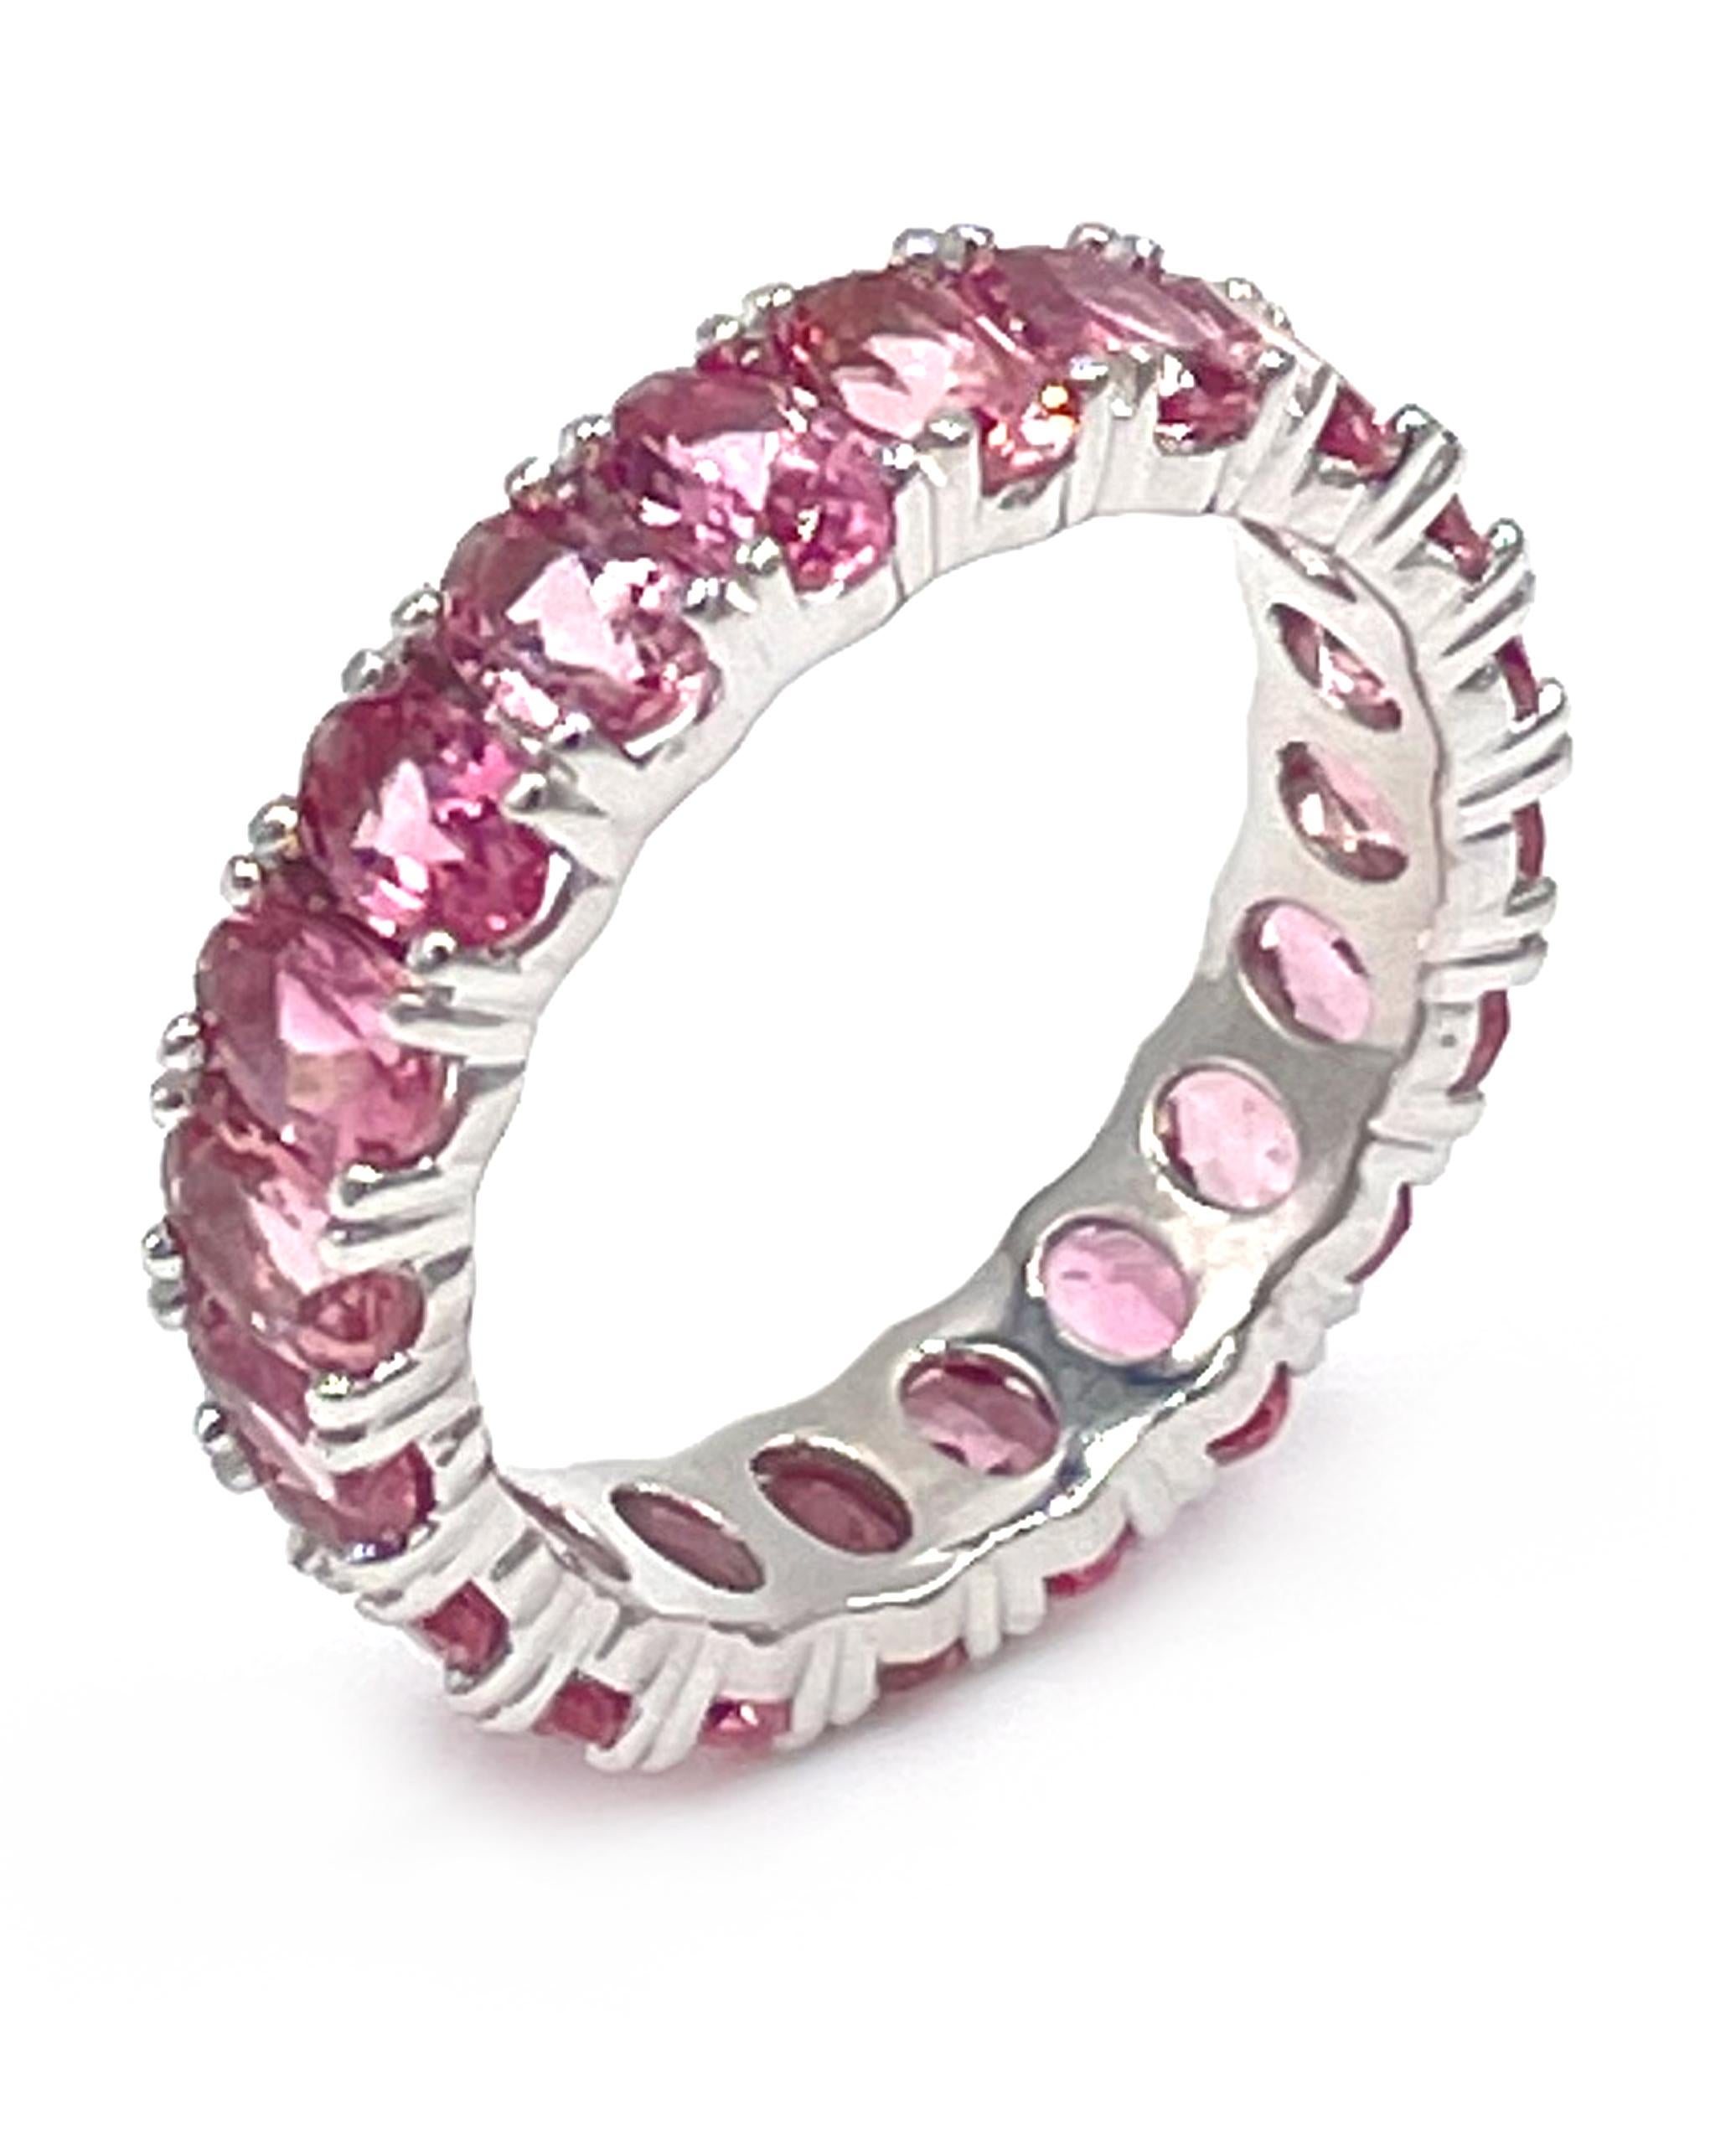 14K white gold eternity ring furnished with 22 oval shaped pink tourmalines weighing 6.60 carats total weight.

* Finger size 6.75 (can be made in any size - 2-3 week turn around)
* 5.00mm wide